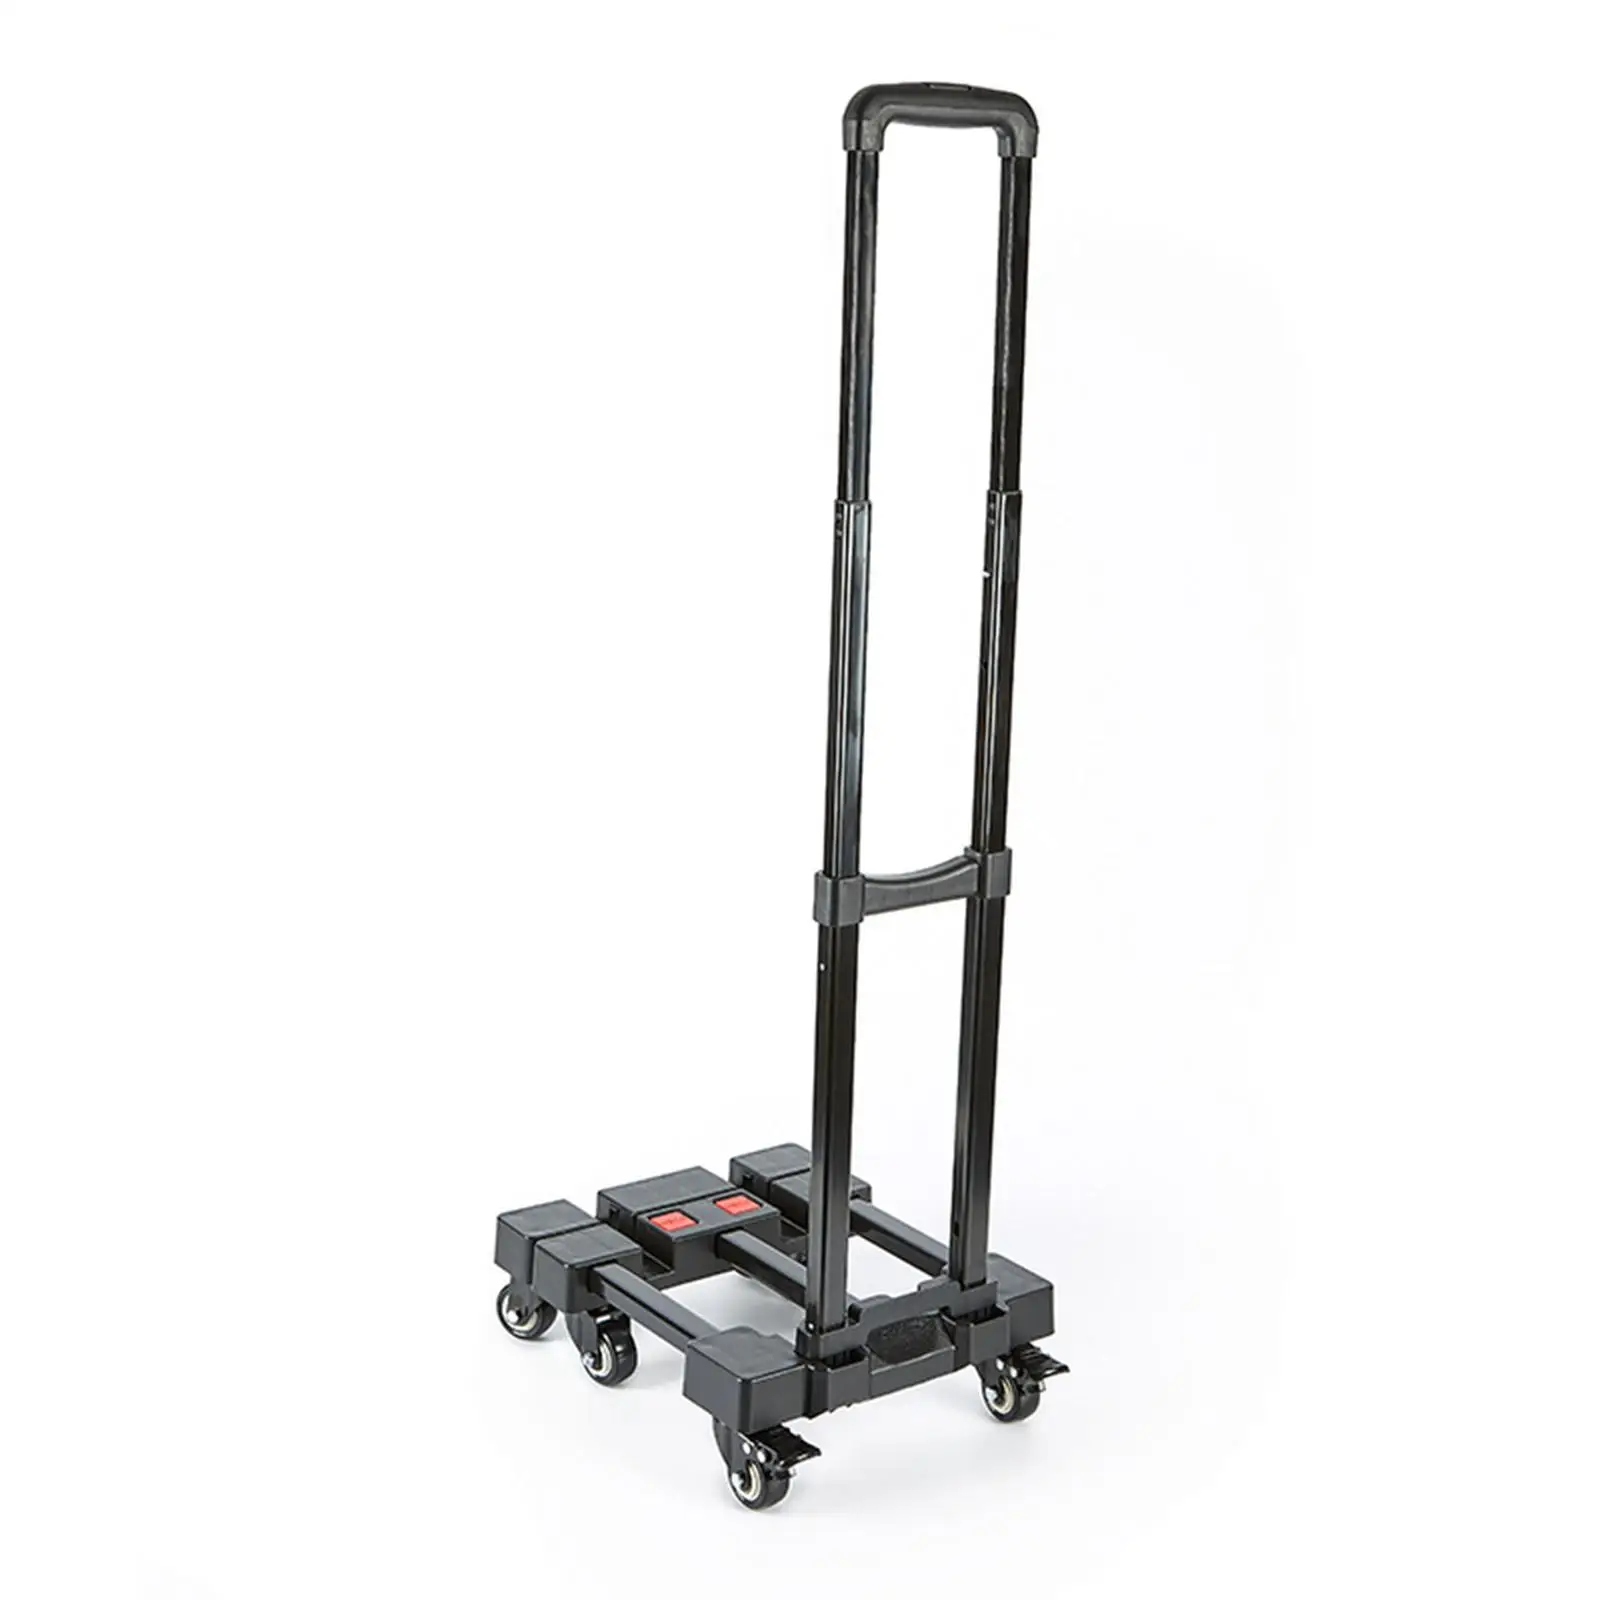 Folding Hand Truck Extendable Base Shopping Cart for Easy Moving Delivery Houshold Transportation Maximum Load 100kg (220lb)